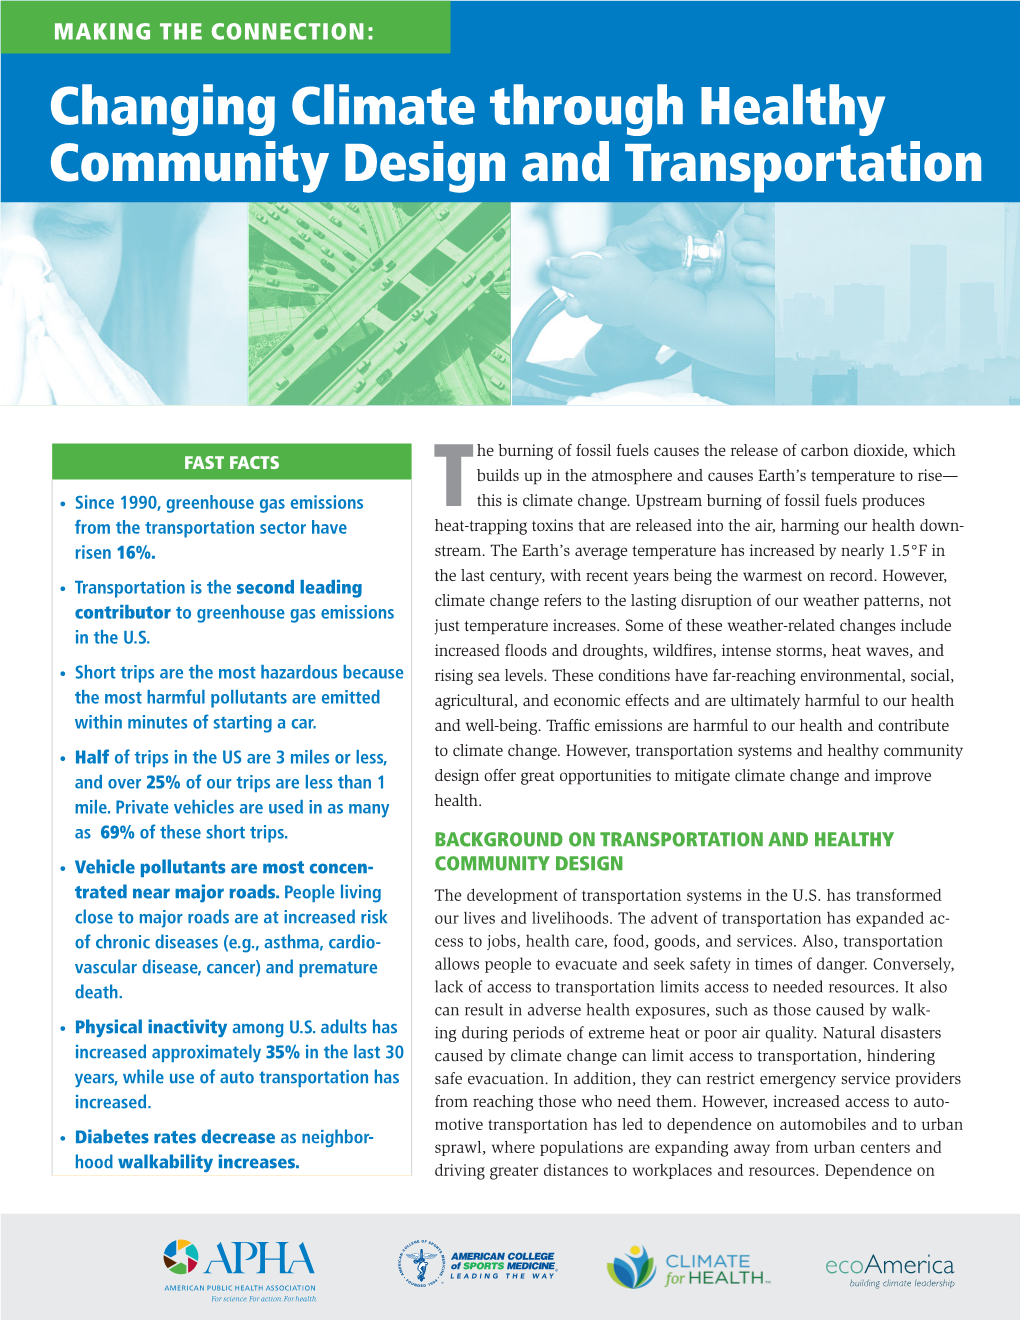 Changing Climate Through Healthy Community Design and Transportation